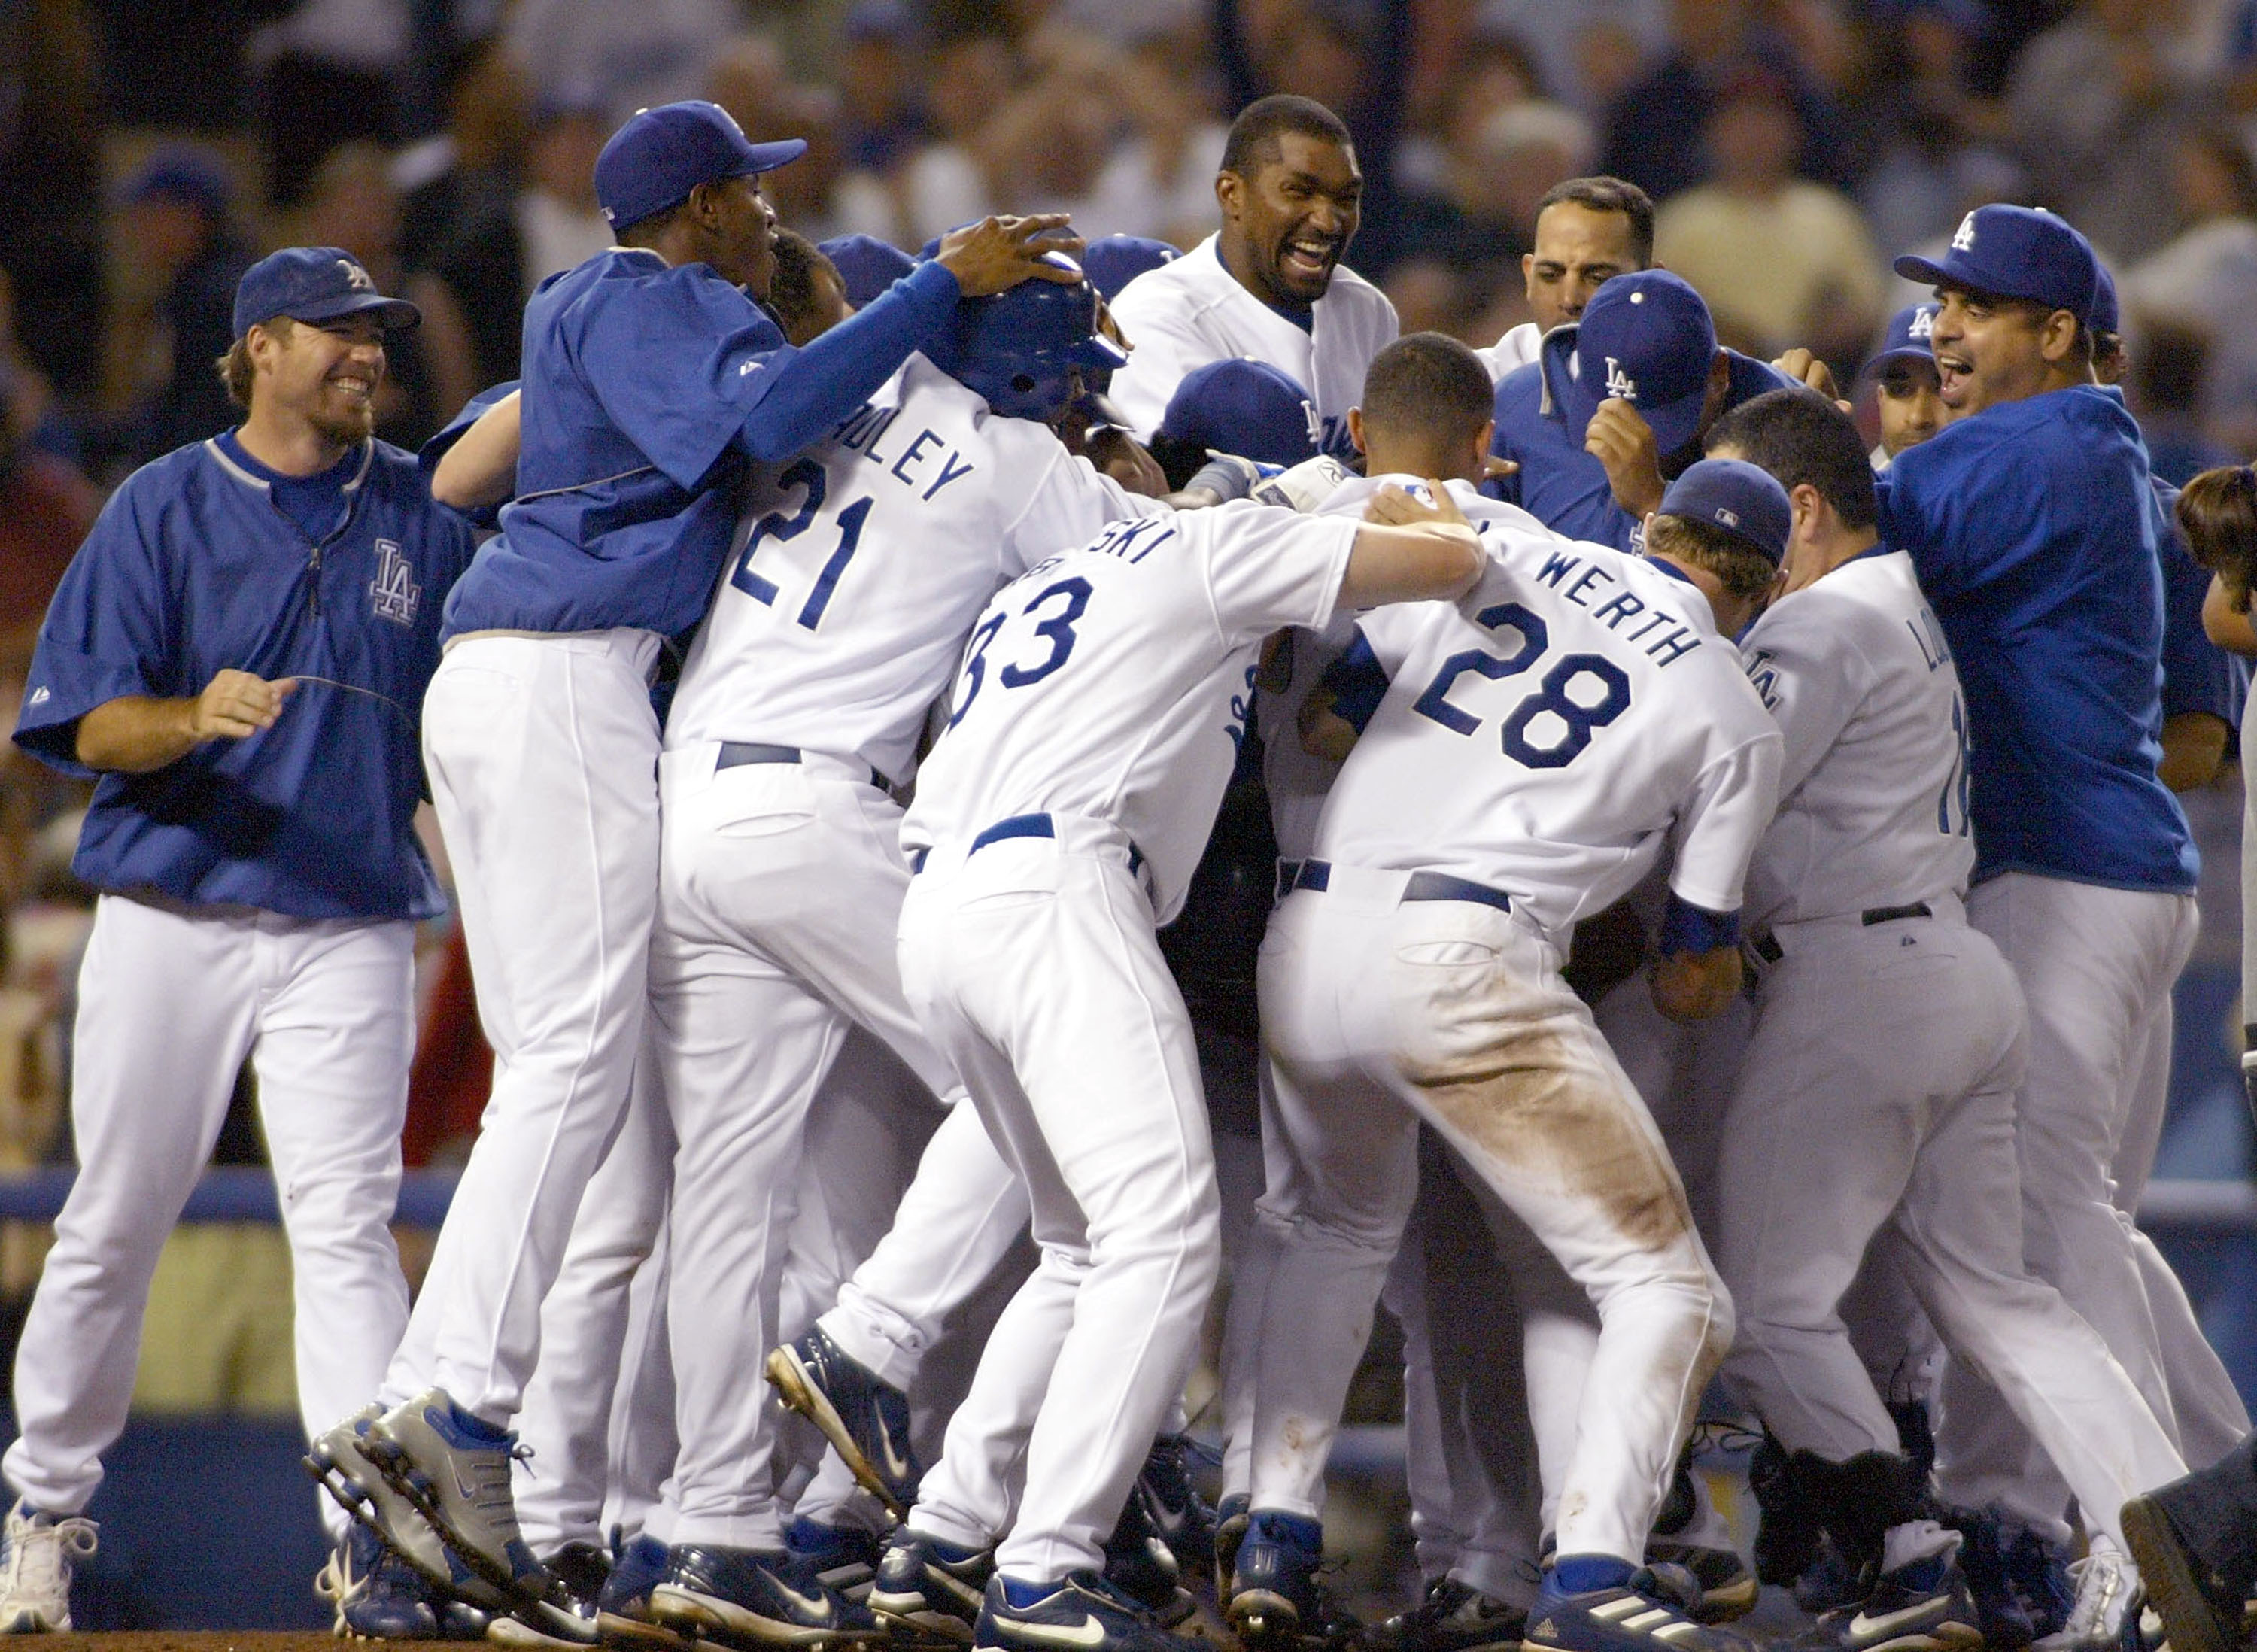 LOS ANGELES - JULY 23:  The Dodgers celebrate defeating the San Diego Padres, after the game winning home run was hit by Adrian Beltre #29 of the Los Angeles Dodgers in the ninth inning, on July 23, 2004 at Dodger Stadium in Los Angeles, California.  (Pho